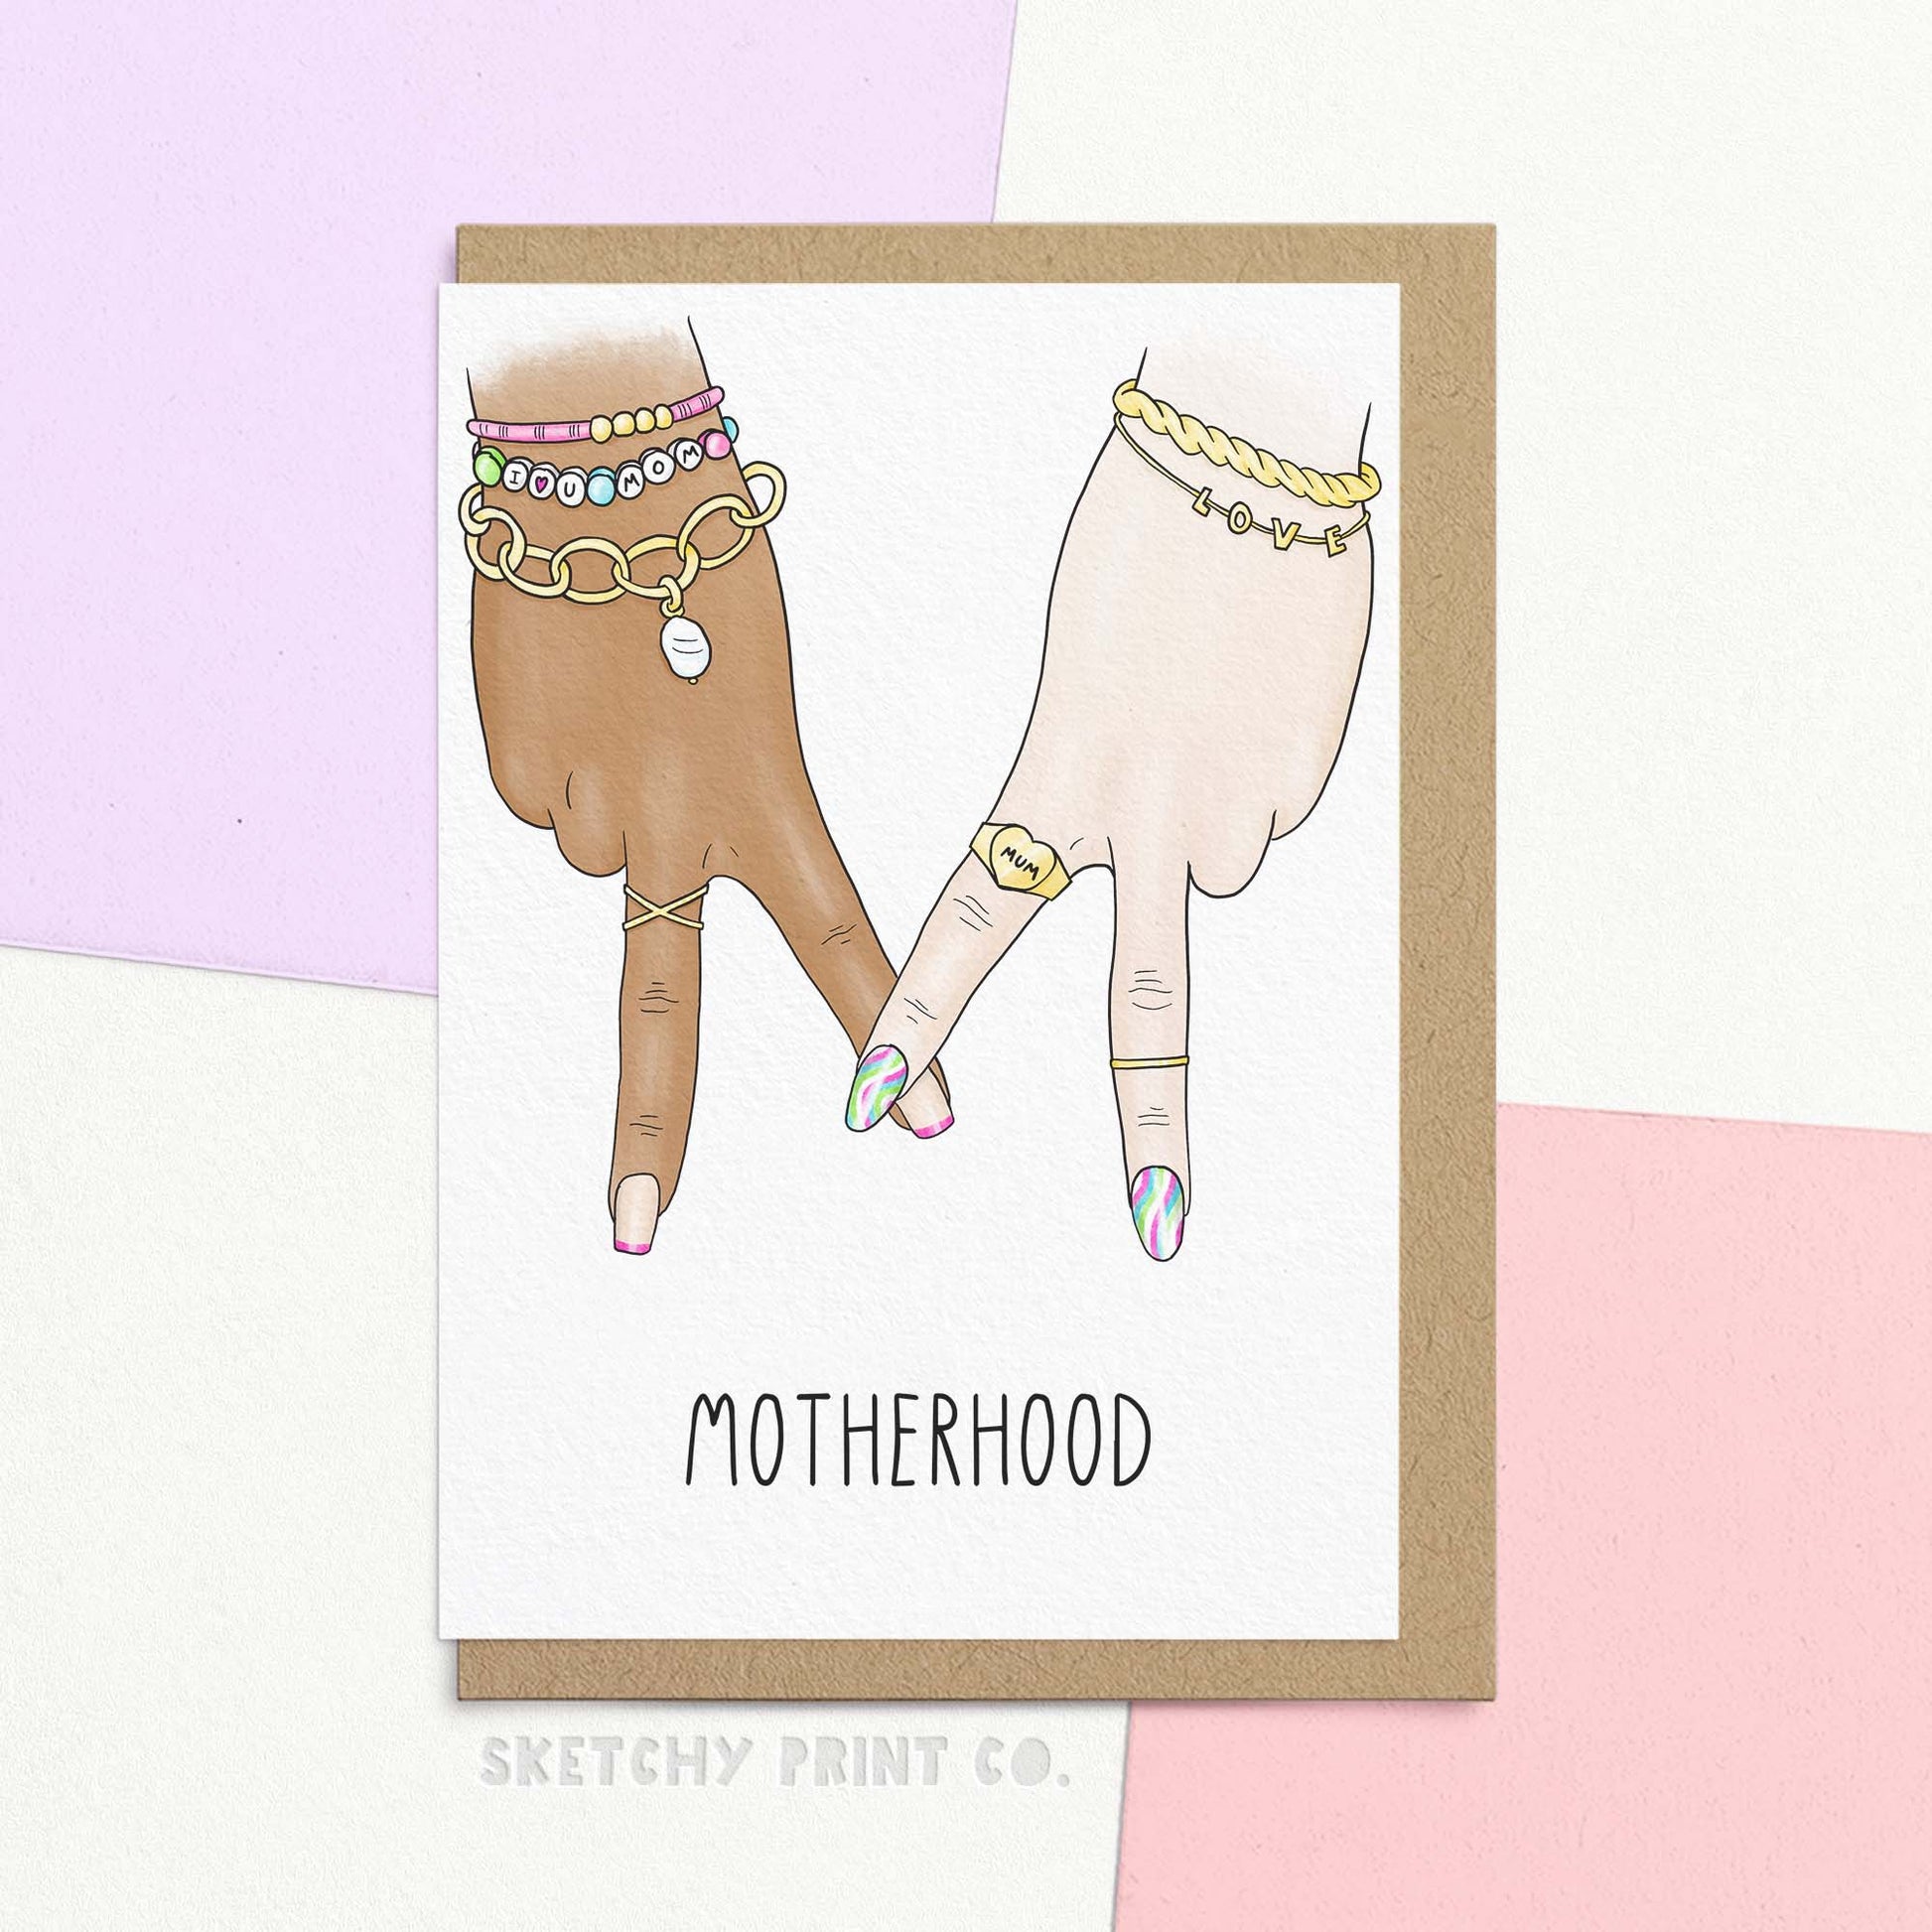 Cute new mum card featuring stylish illustration of two hands making an 'm' text says 'motherhood'. Indulge a mom-to-be with a humorous card that welcomes her to the Motherhood club. Perfect for Mother's Day, this card is sure to bring a smile to her face. Pair it with gifts for first time mum and add a heartfelt happy mother's day messages to make her 1st Mother's Day even more special!